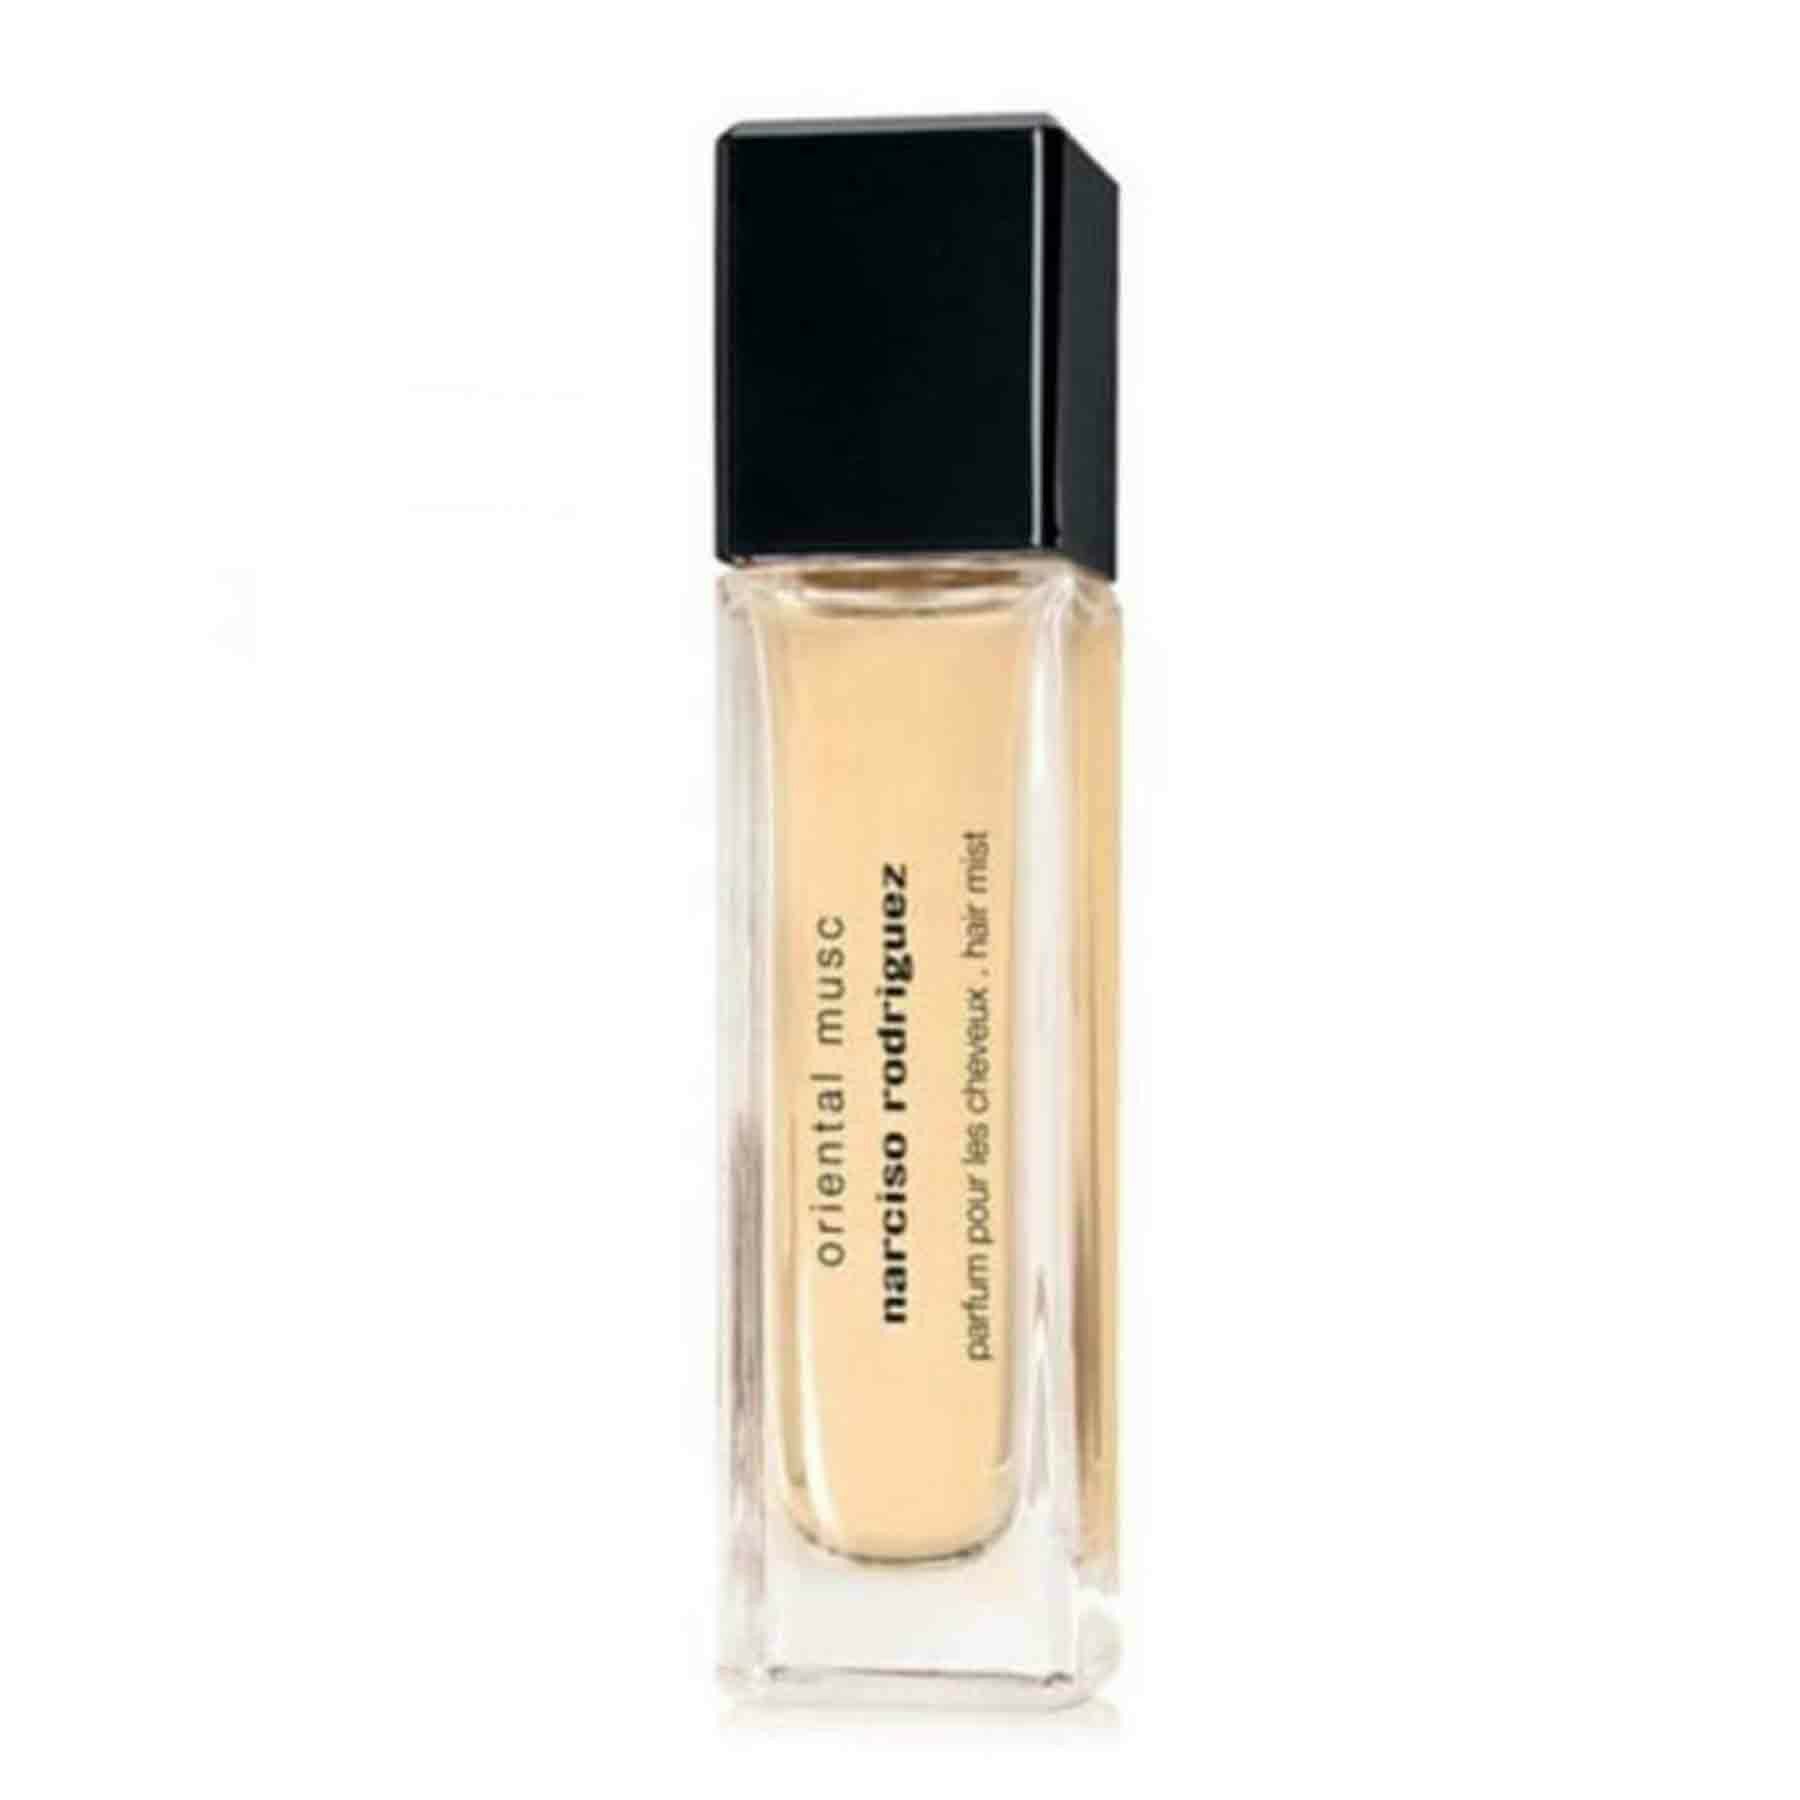 Narciso Rodriguez Amber Musc Scented Hair Mist